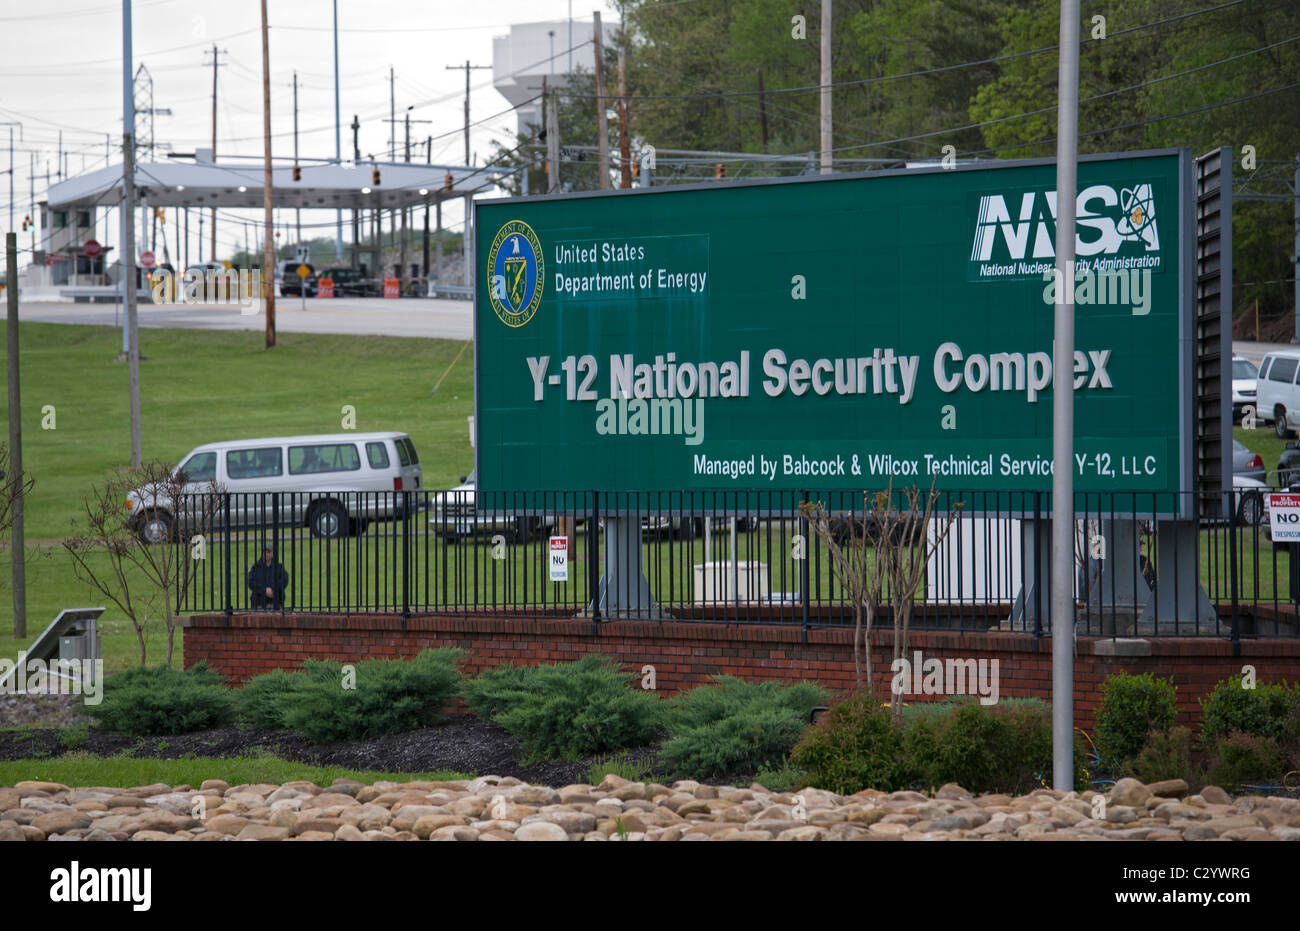 Oak Ridge, Tennessee - The Y-12 National Security Complex, which produces materials for nuclear weapons. Stock Photo